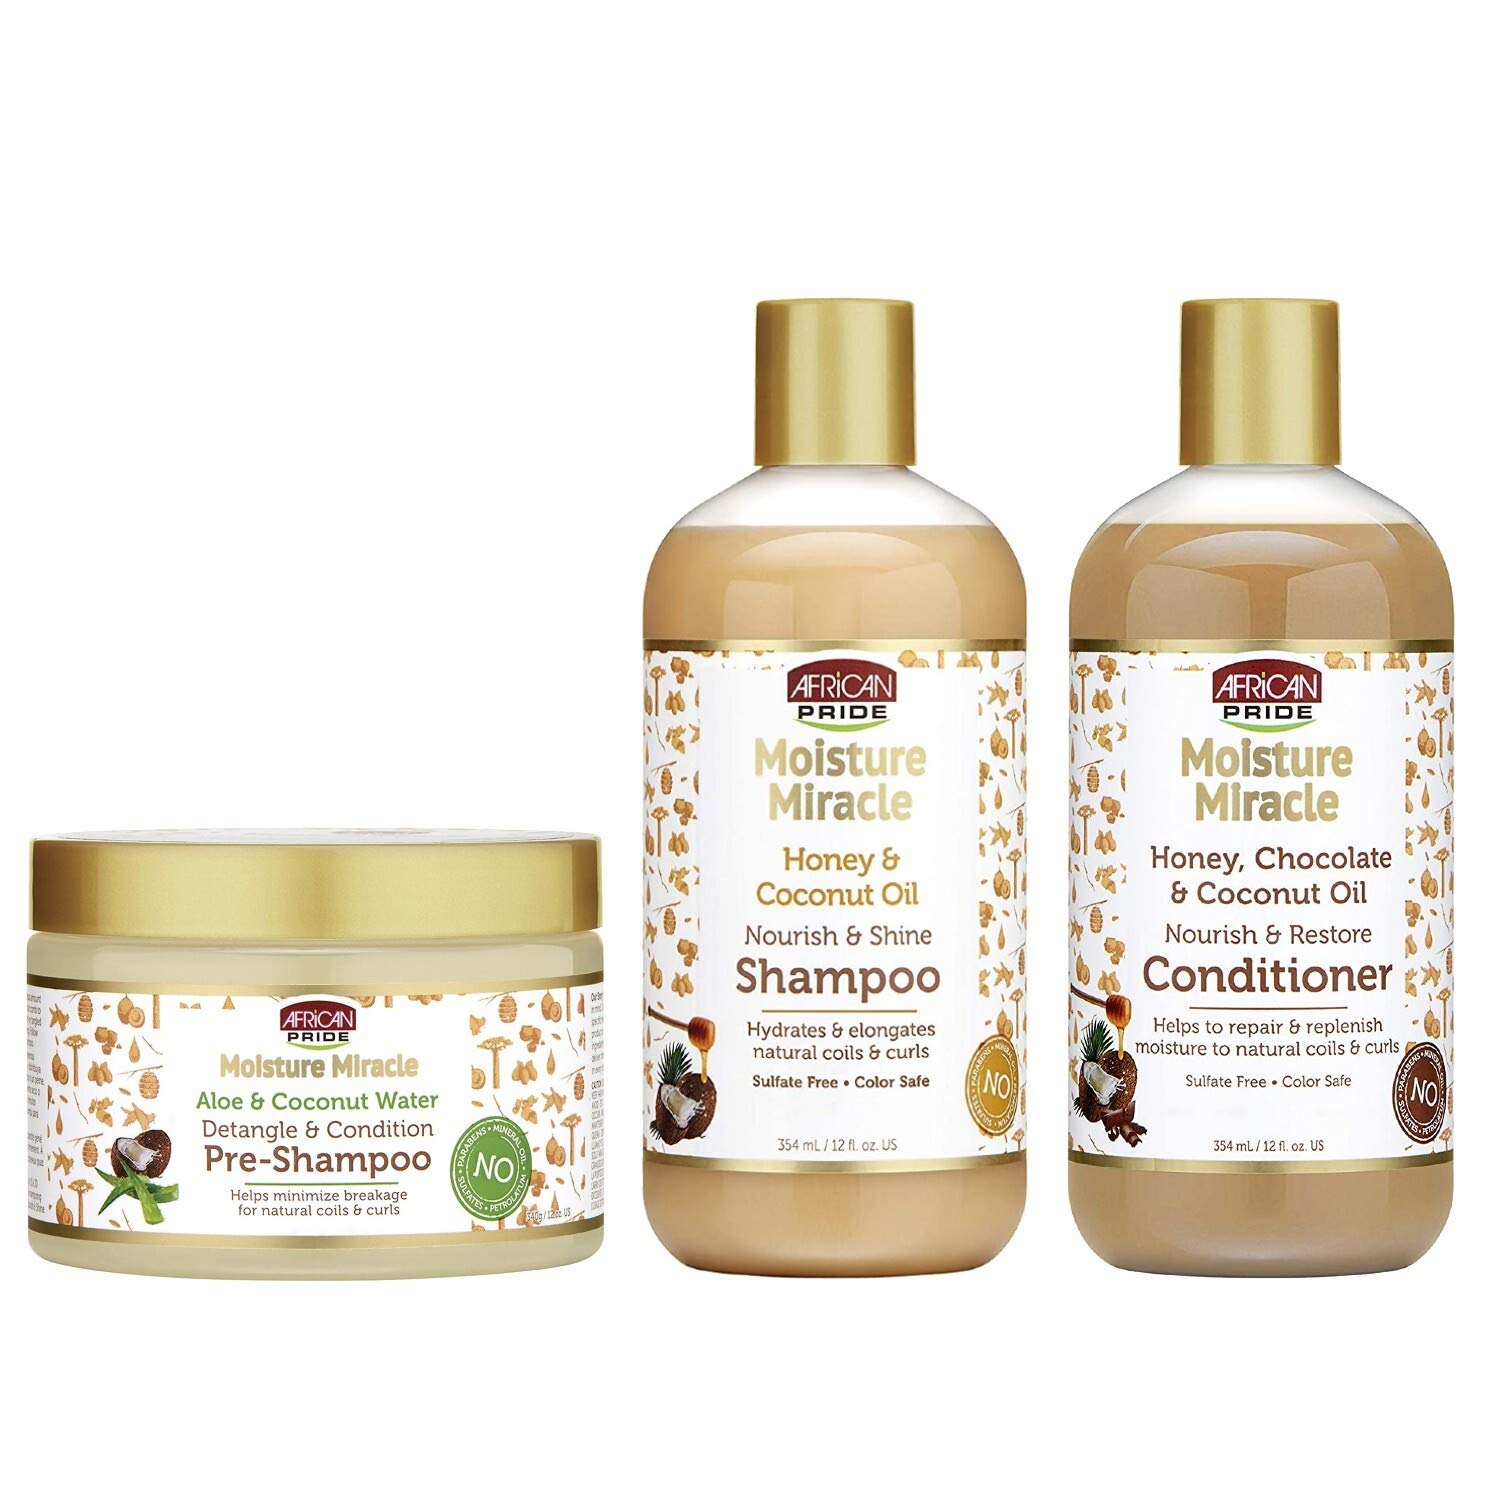 African Pride Moisture Miracle, Honey & Coconut Oil [...]